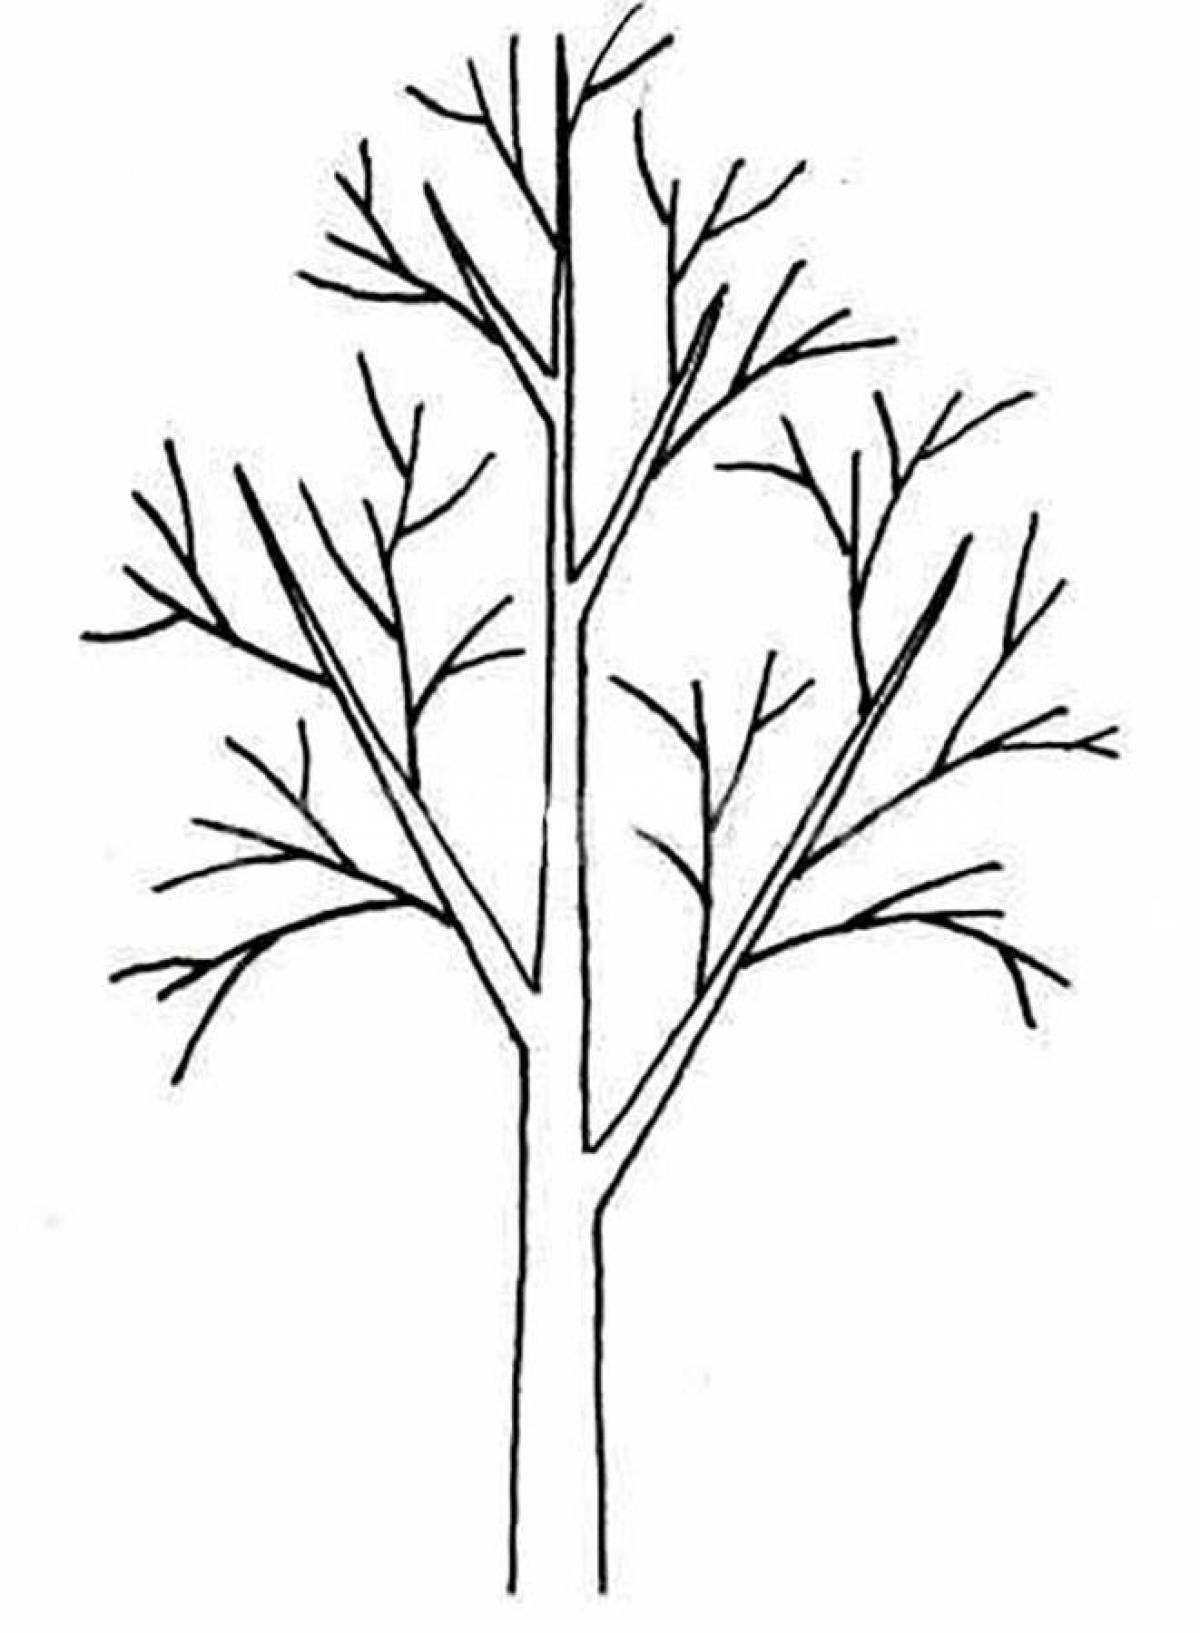 Coloring book magical tree without leaves for children